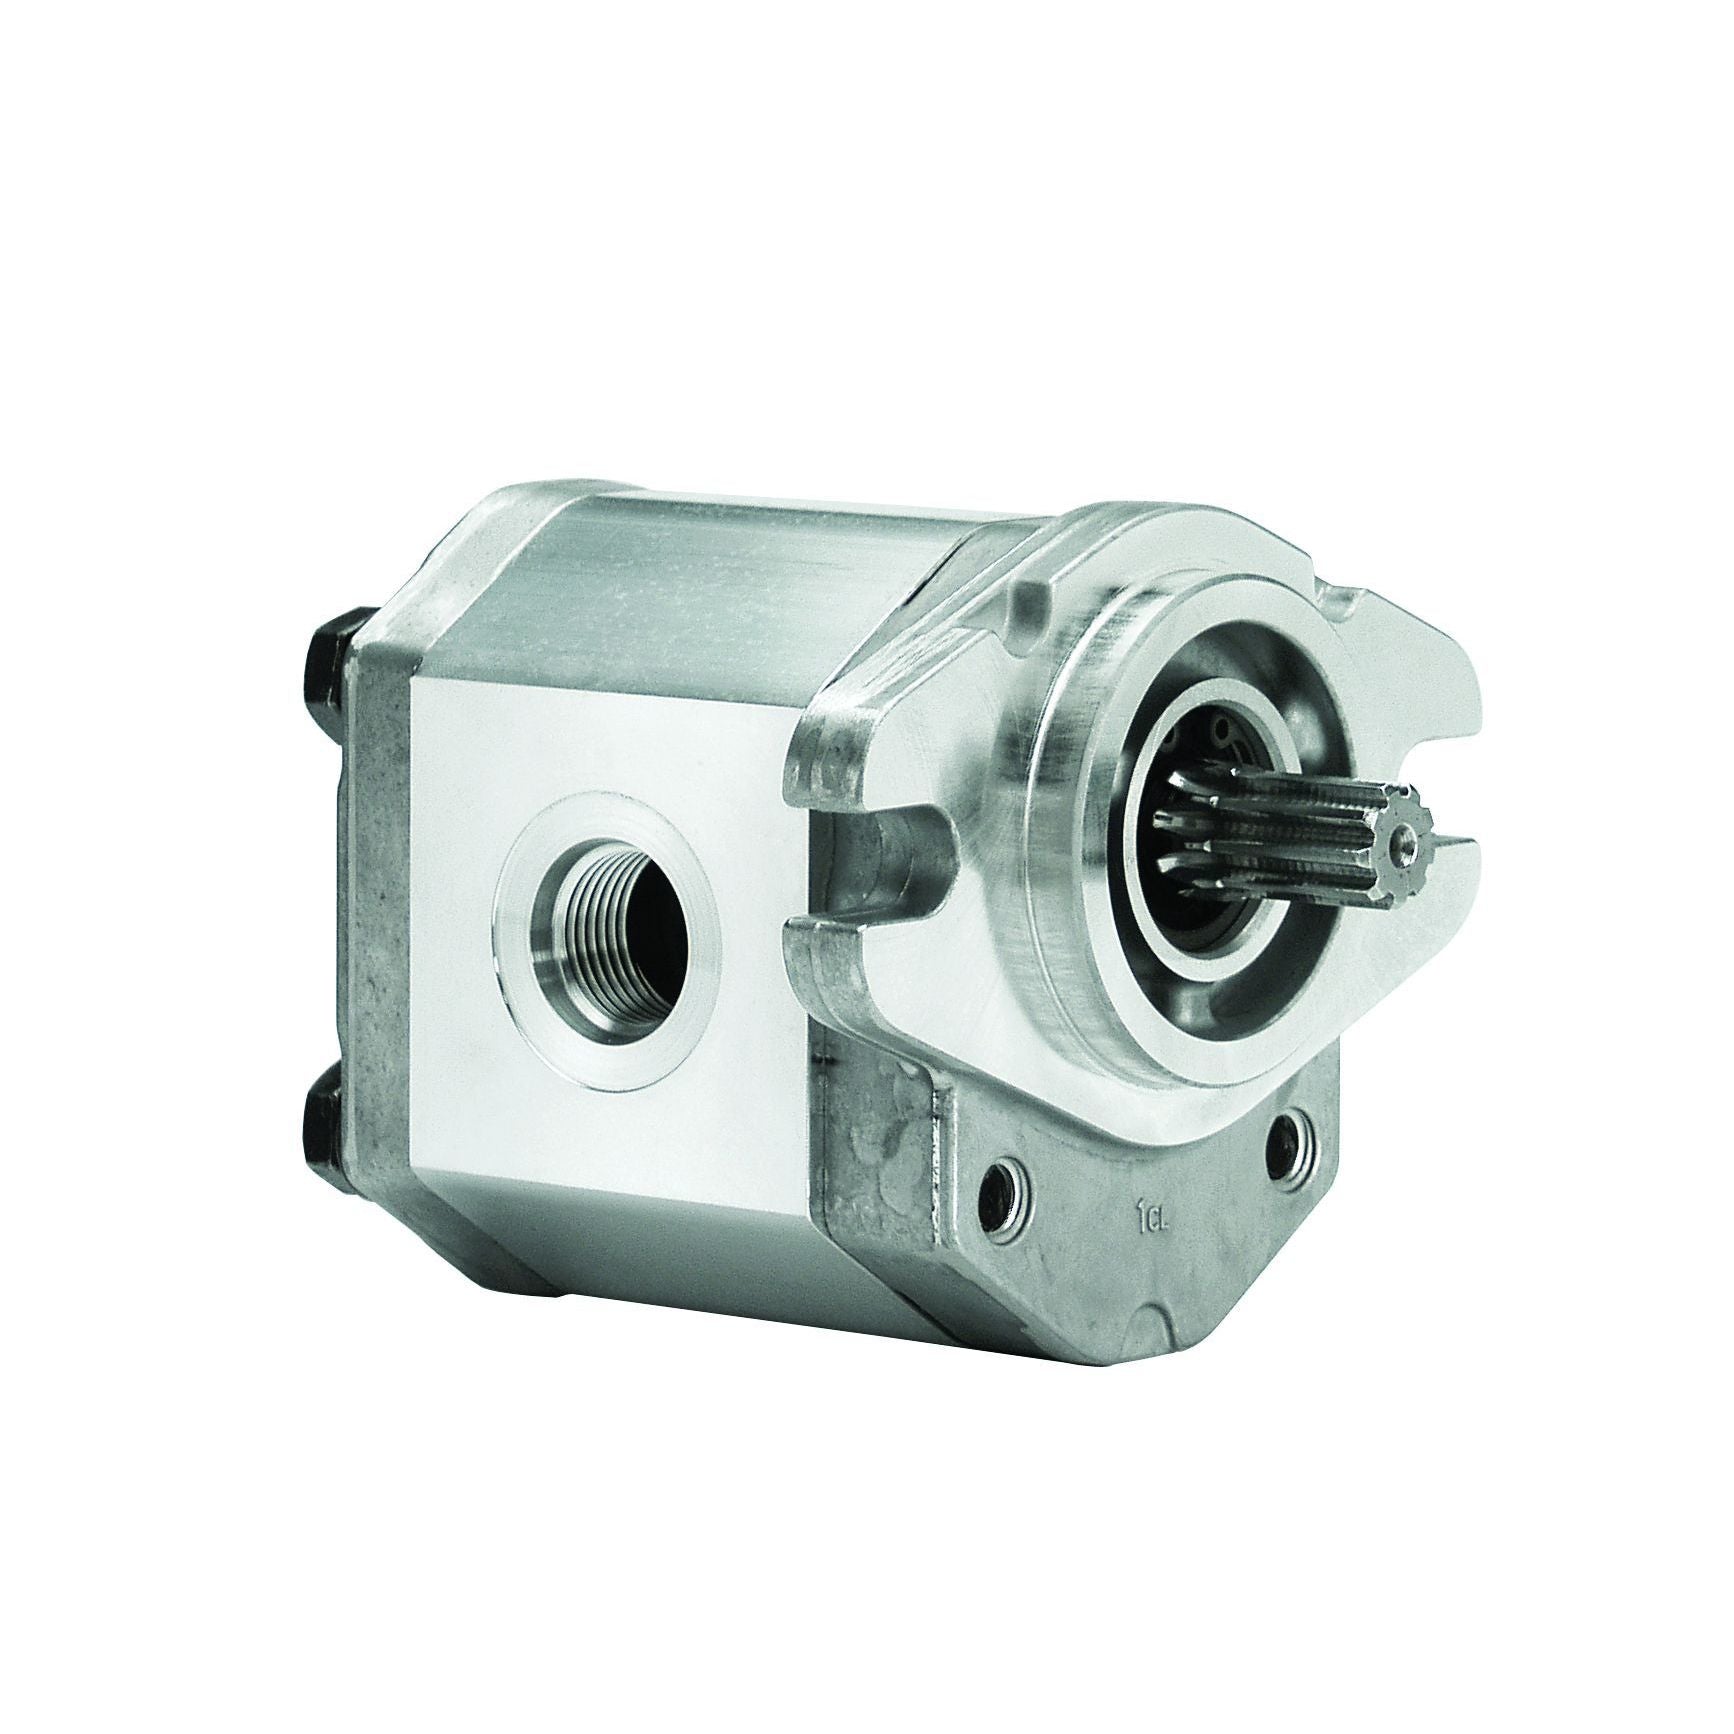 ALP1A-S-2-S1 : Marzocchi Gear Pump, CCW, 1.4cc (0.0854in3), 0.67 GPM, 3625psi, 6000 RPM, #8 SAE (1/2") In, #6 SAE (3/8") Out, Splined Shaft 9T 20/40DP, SAE AA 2-Bolt Mount